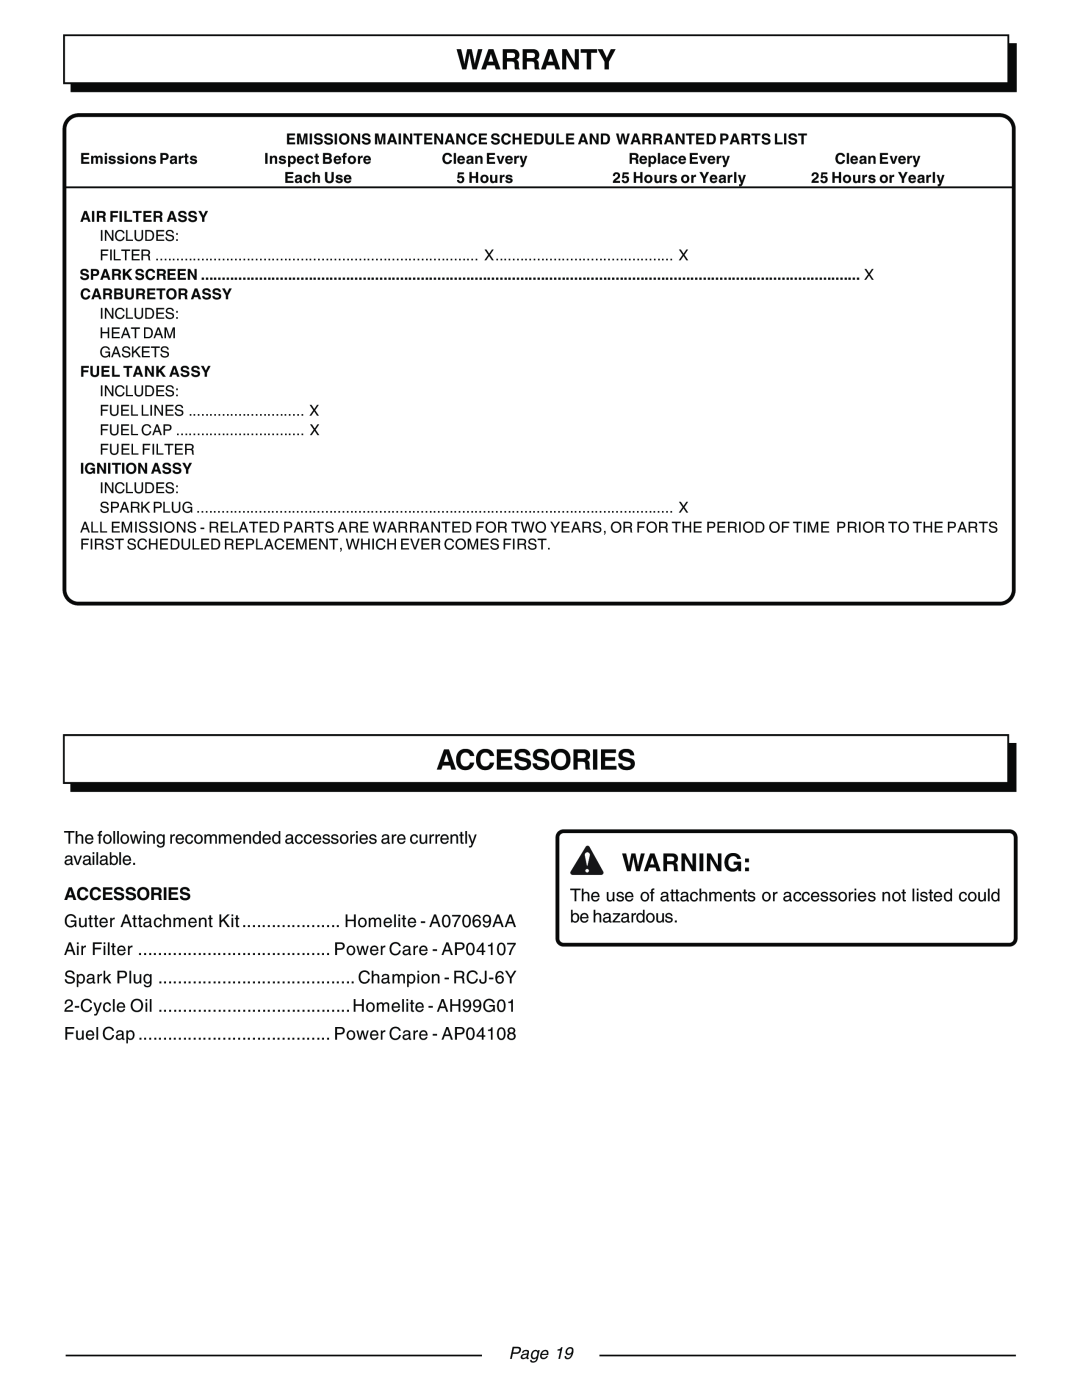 Homelite UT08540 Accessories, Warranty, Page, Homelite - A07069AA, Emissions Maintenance Schedule And Warranted Parts List 